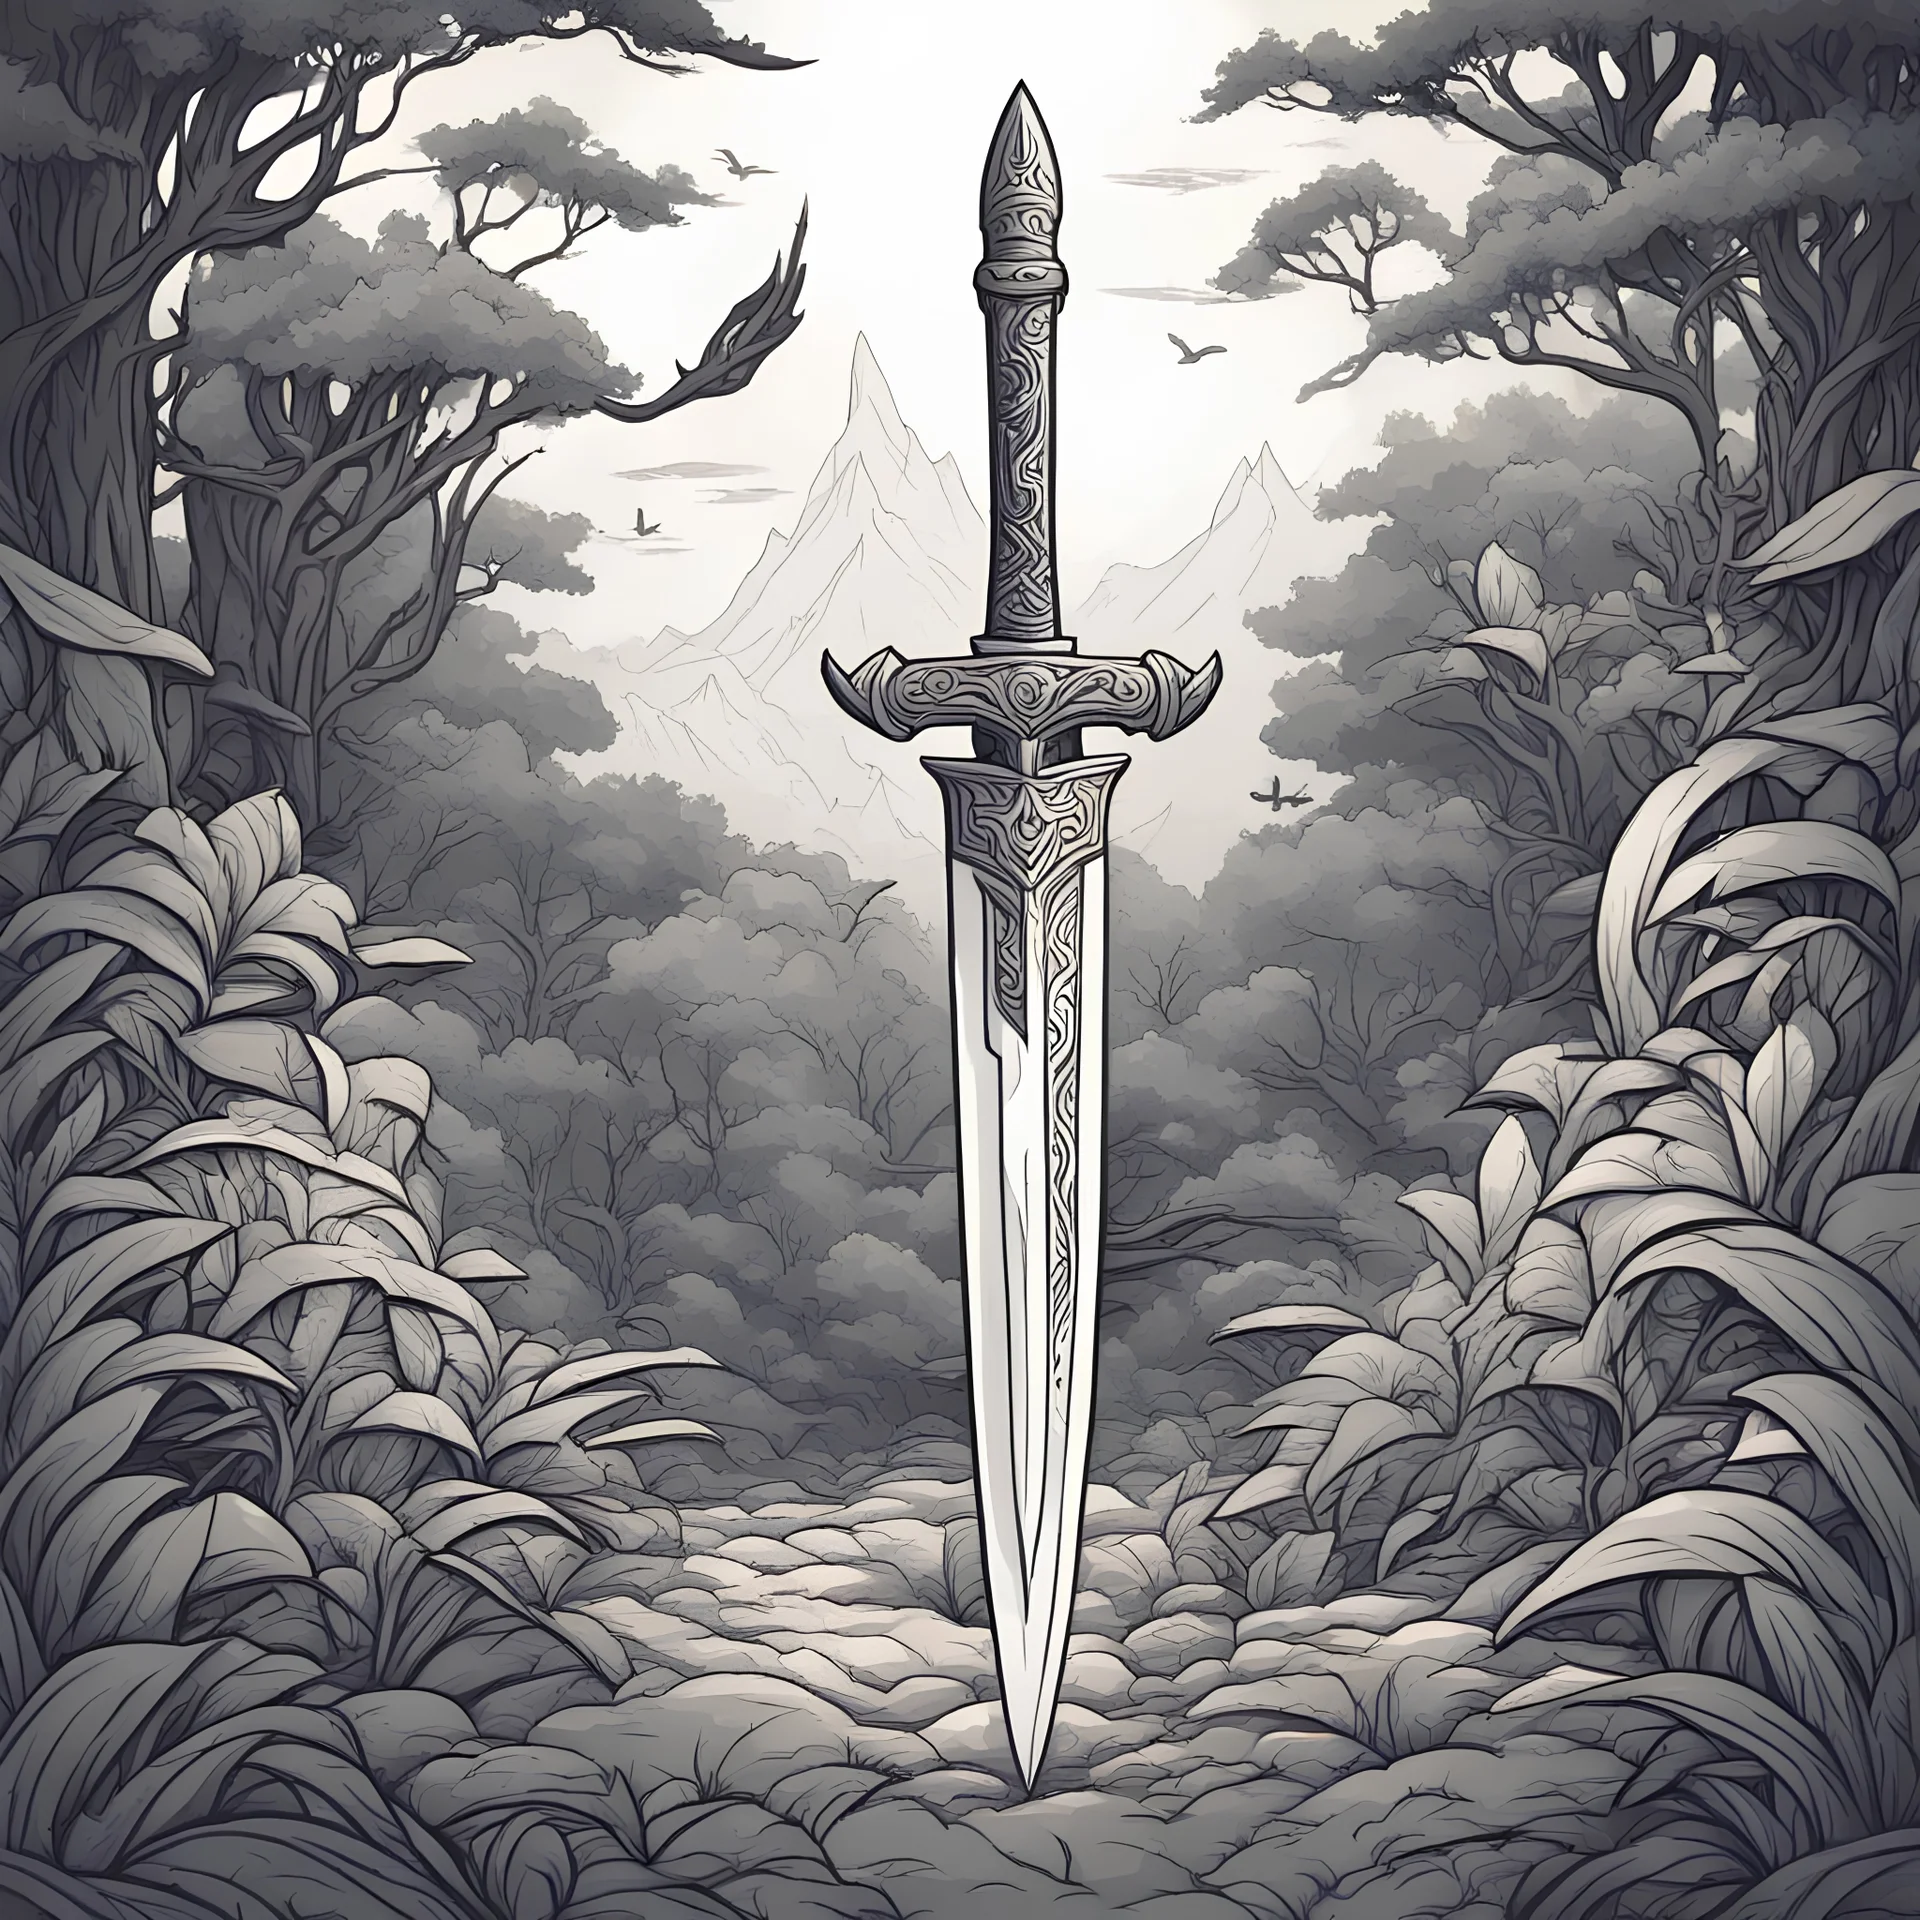 A sword used in combat and then the blade flies off into the bushes in Zen Tangle art style